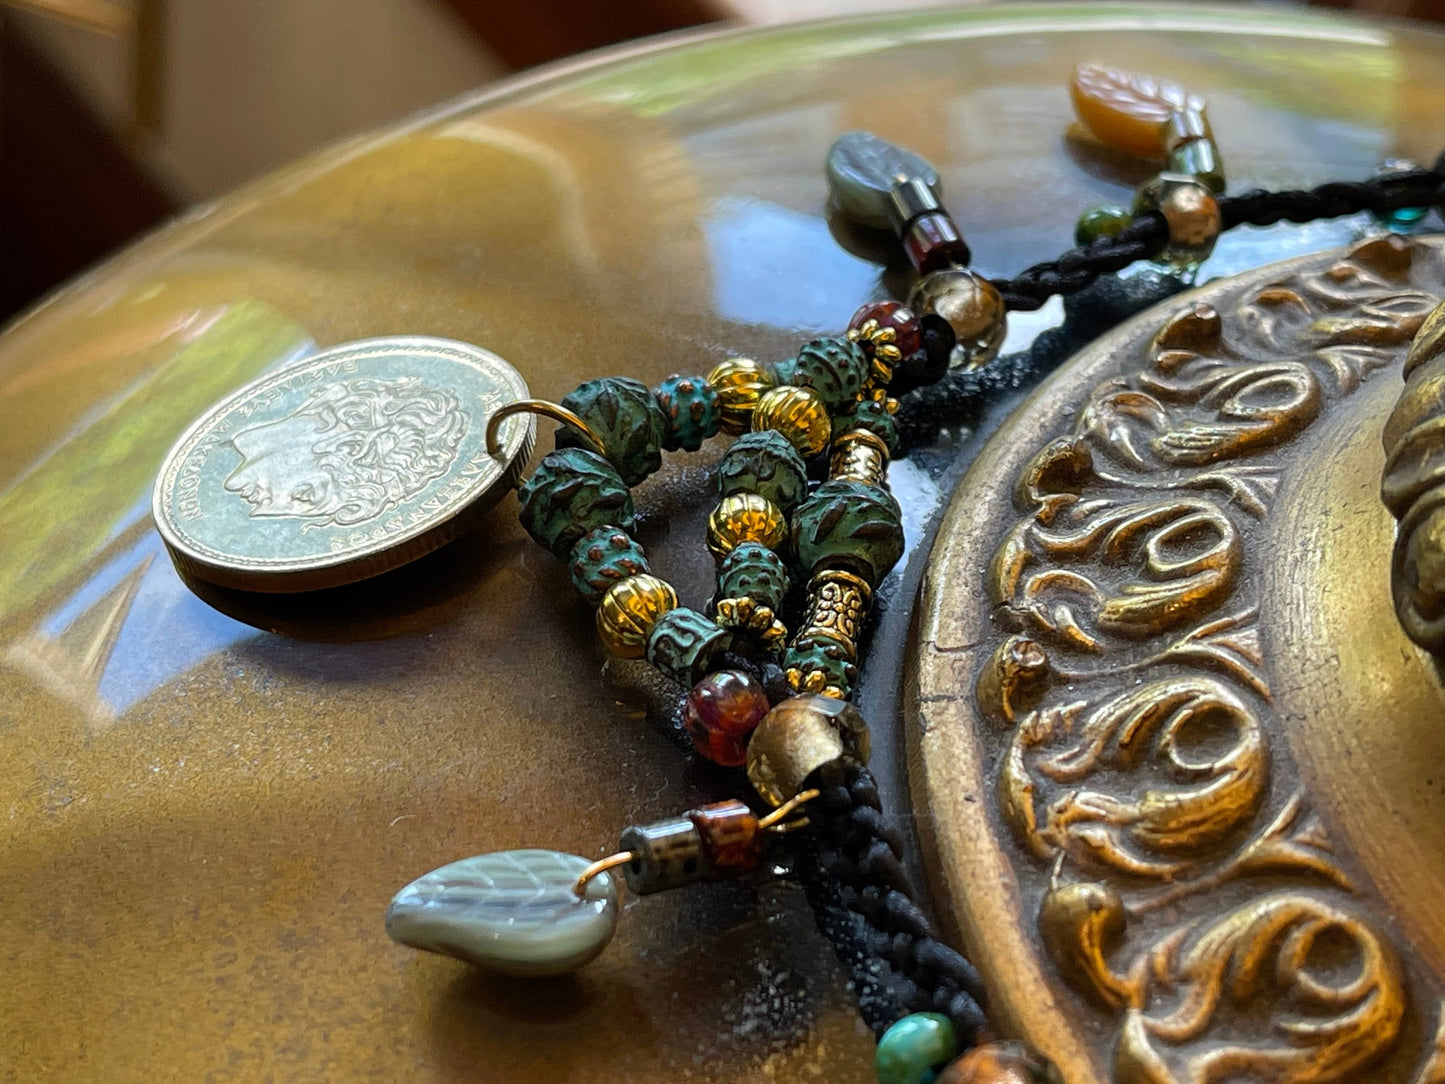 Alexander the Great genuine Greek coin pendant necklace, Czech glass leaves, copper beads (green patina) fire polished crystal, toggle clasp